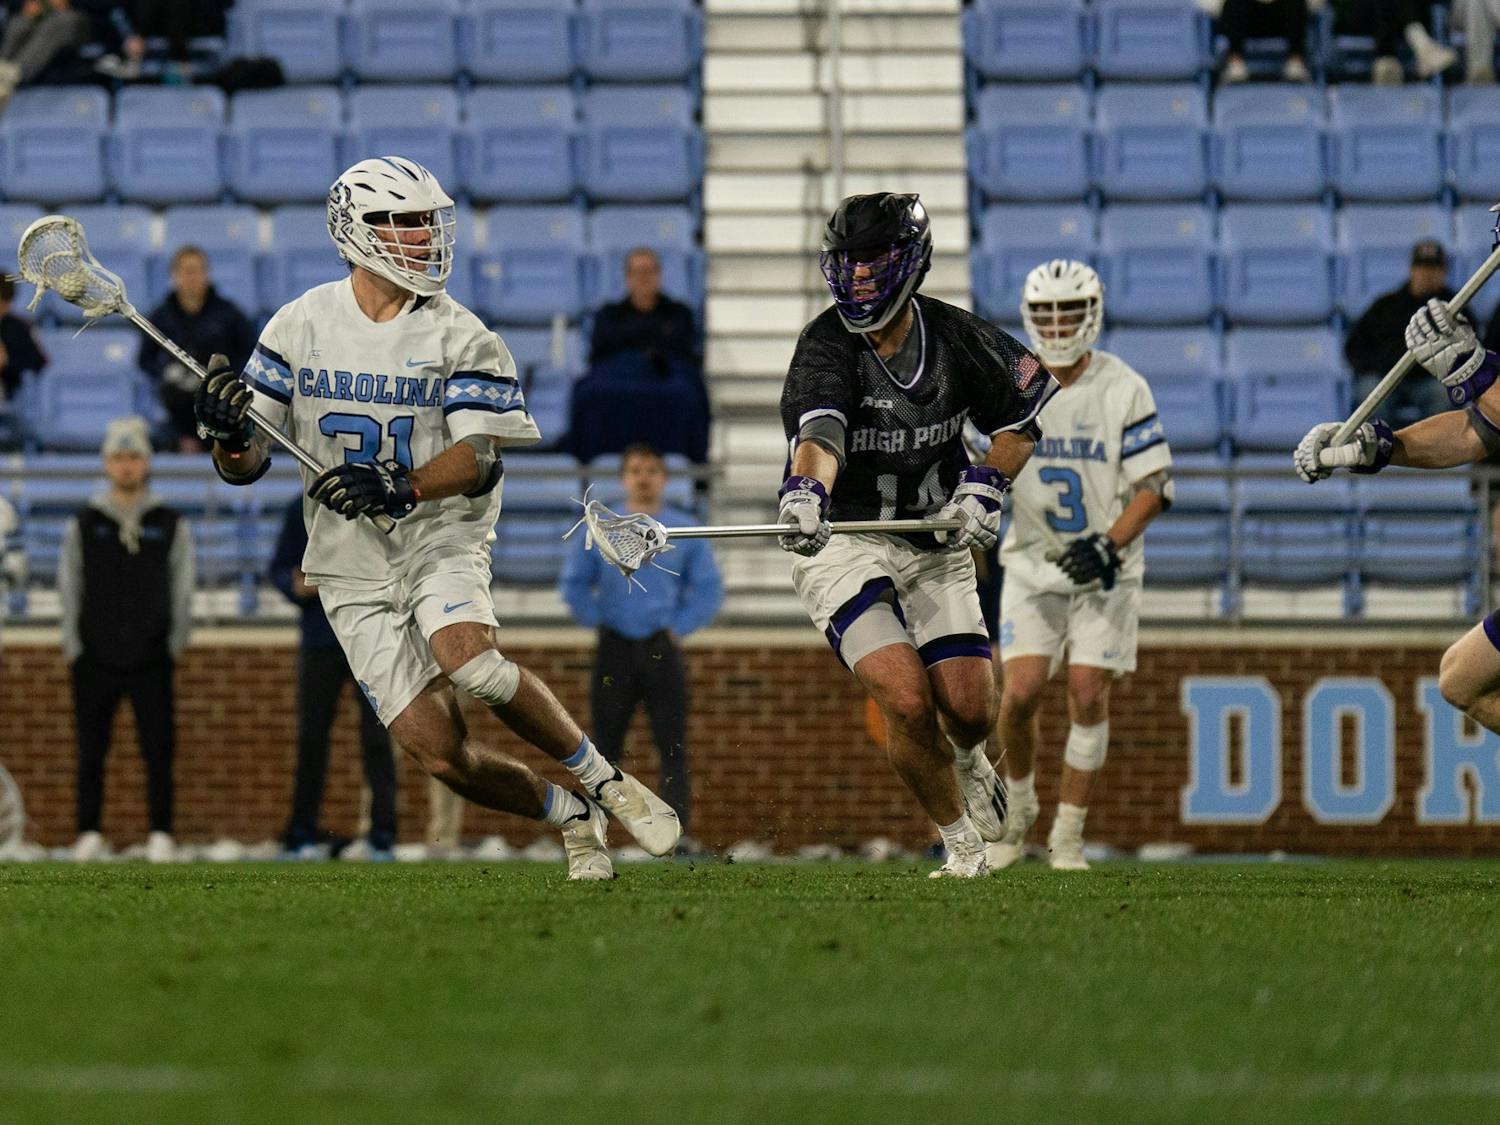 UNC graduate midfielder Connor Maher (31) looks to throw the ball during the men's lacrosse game against High Point on Wednesday, March 22, 2023, at Dorrance Field. UNC beat High Point 16-9.